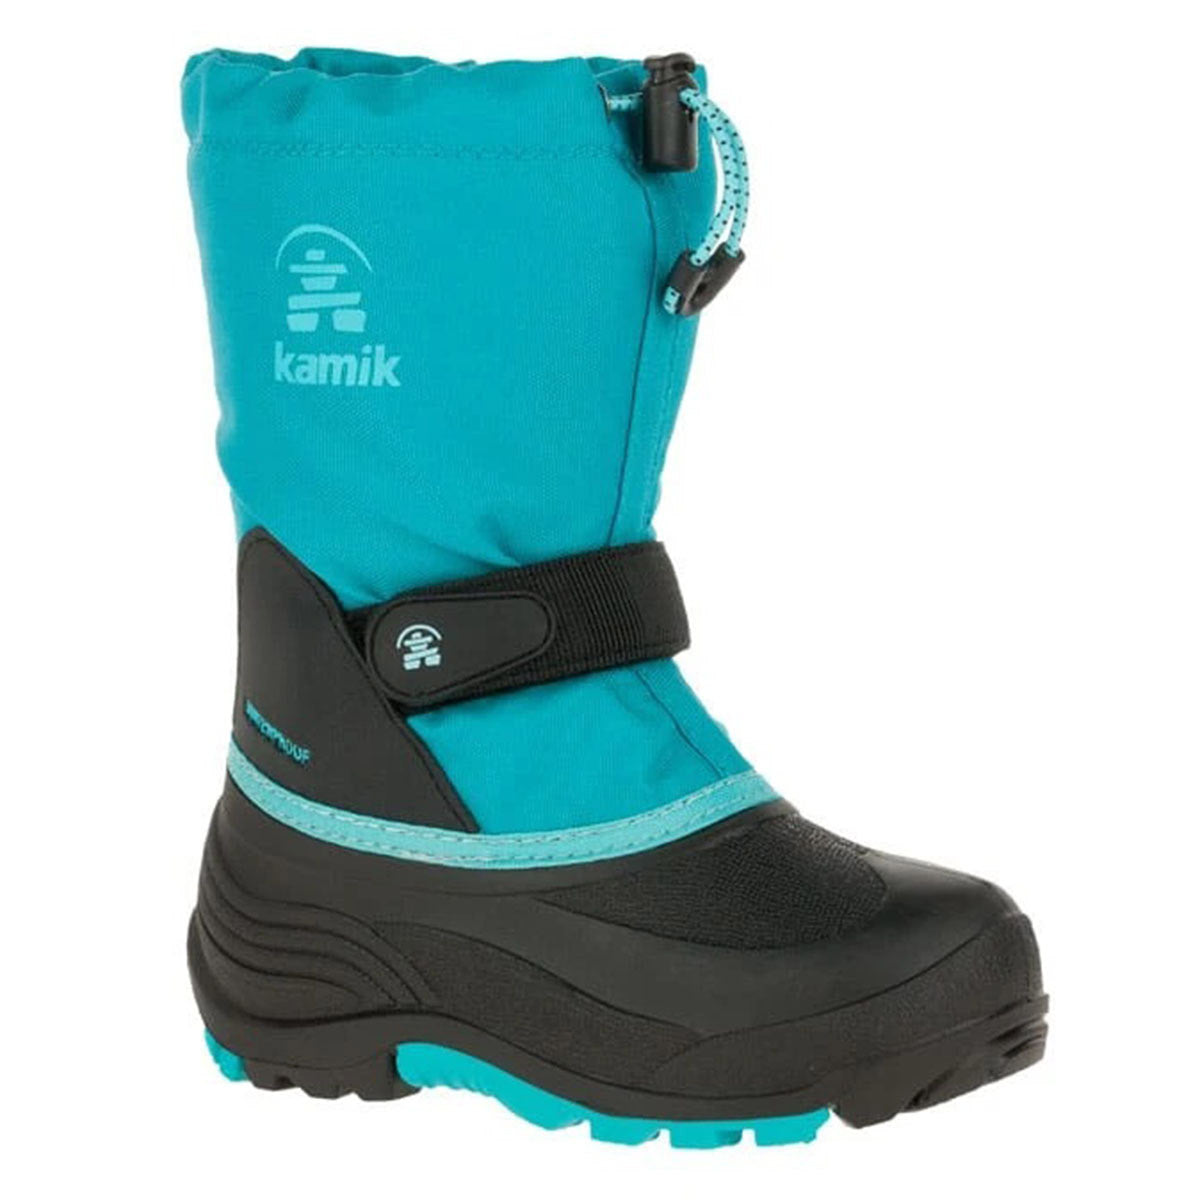 A teal and black Kamik Waterbug 5 children's snow boot with waterproof nylon upper, adjustable strap, and bungee cord closure.